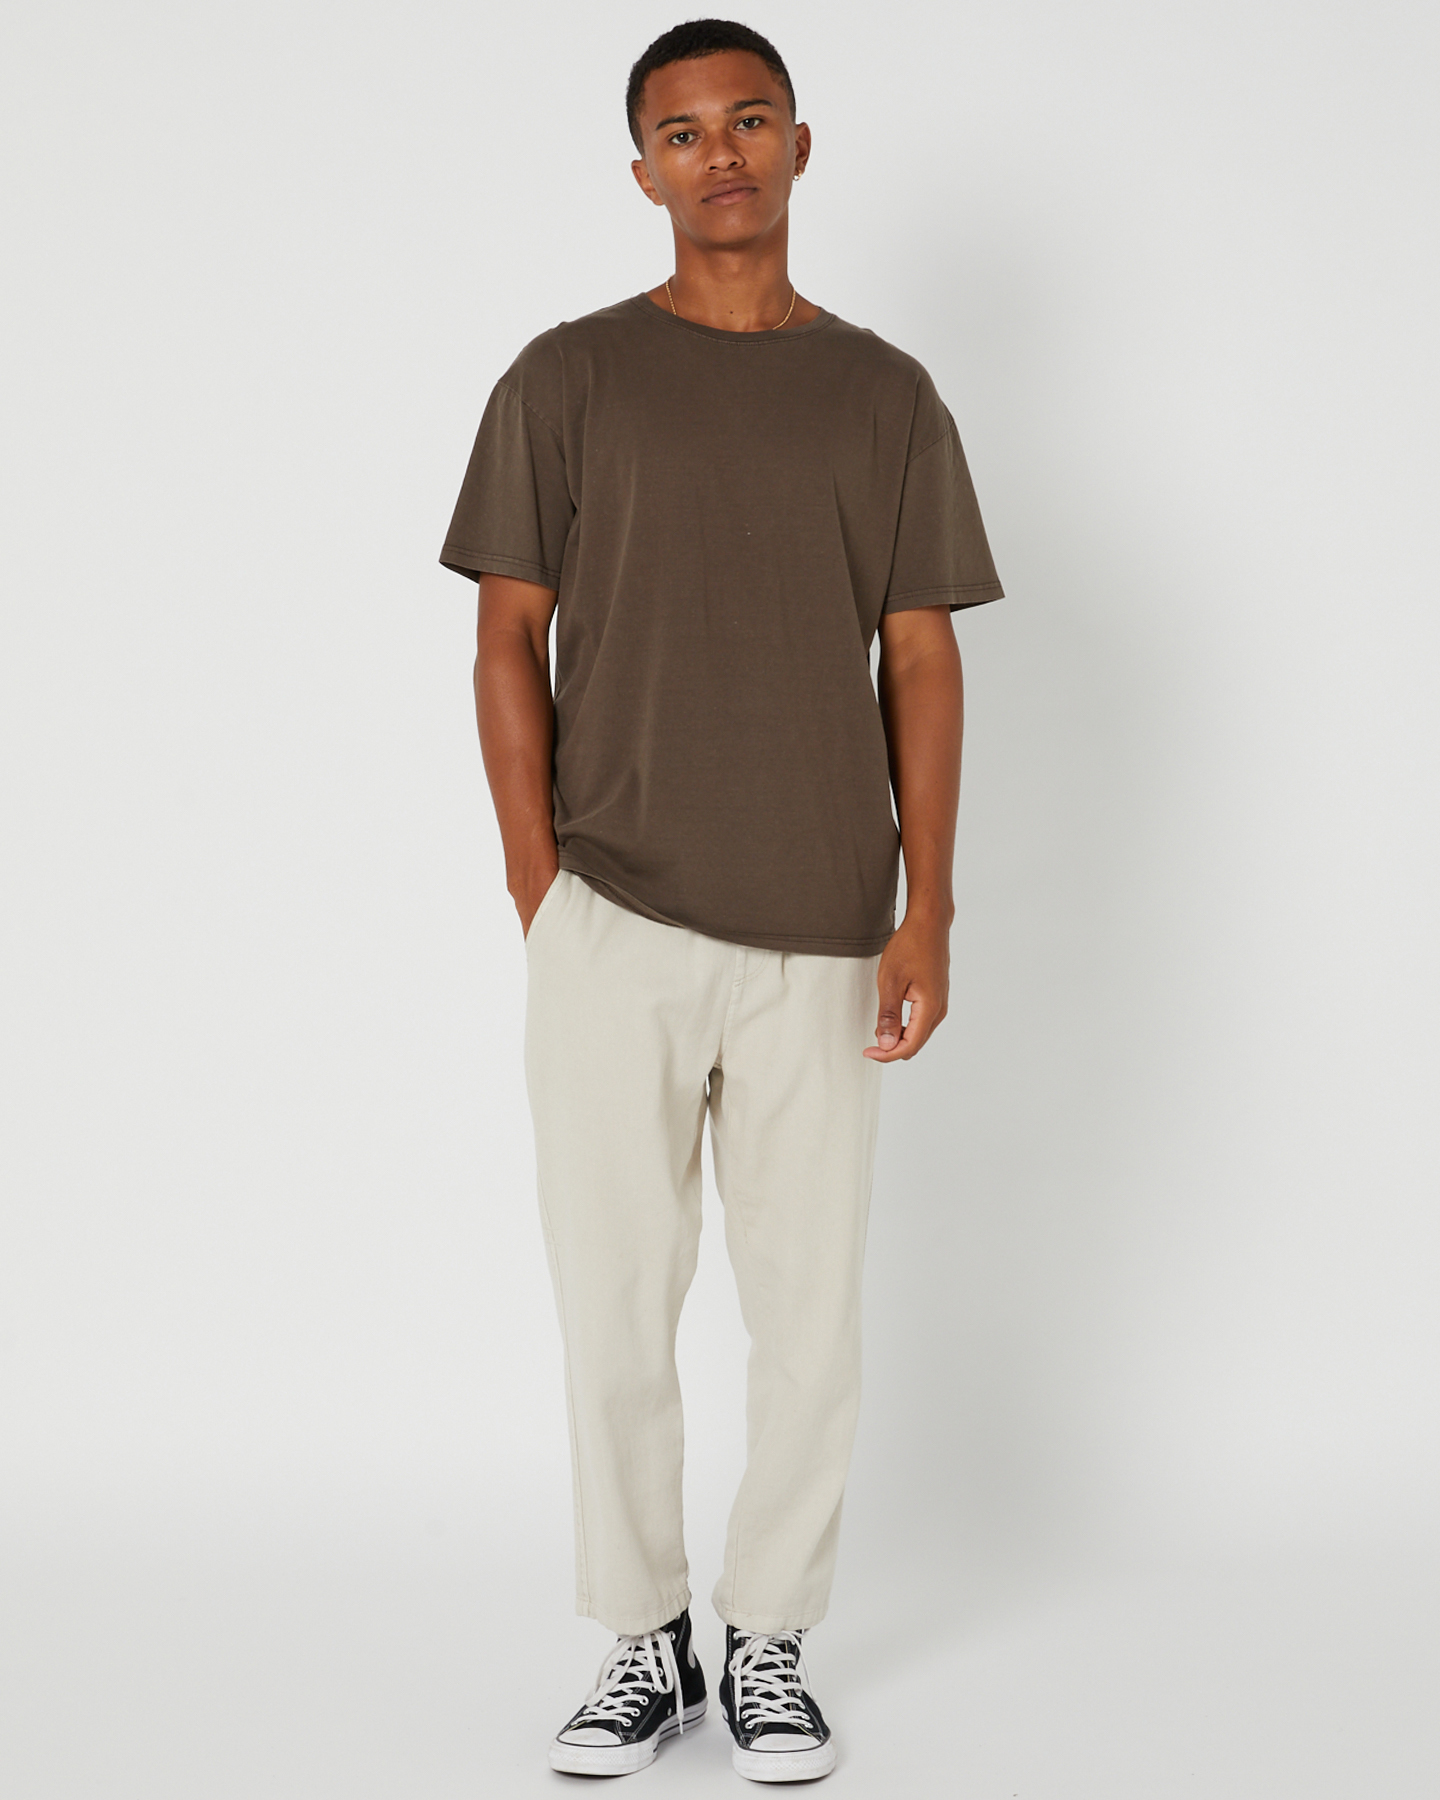 Silent Theory Mens Oversized Ss Tee Chocolate - Chocolate | SurfStitch